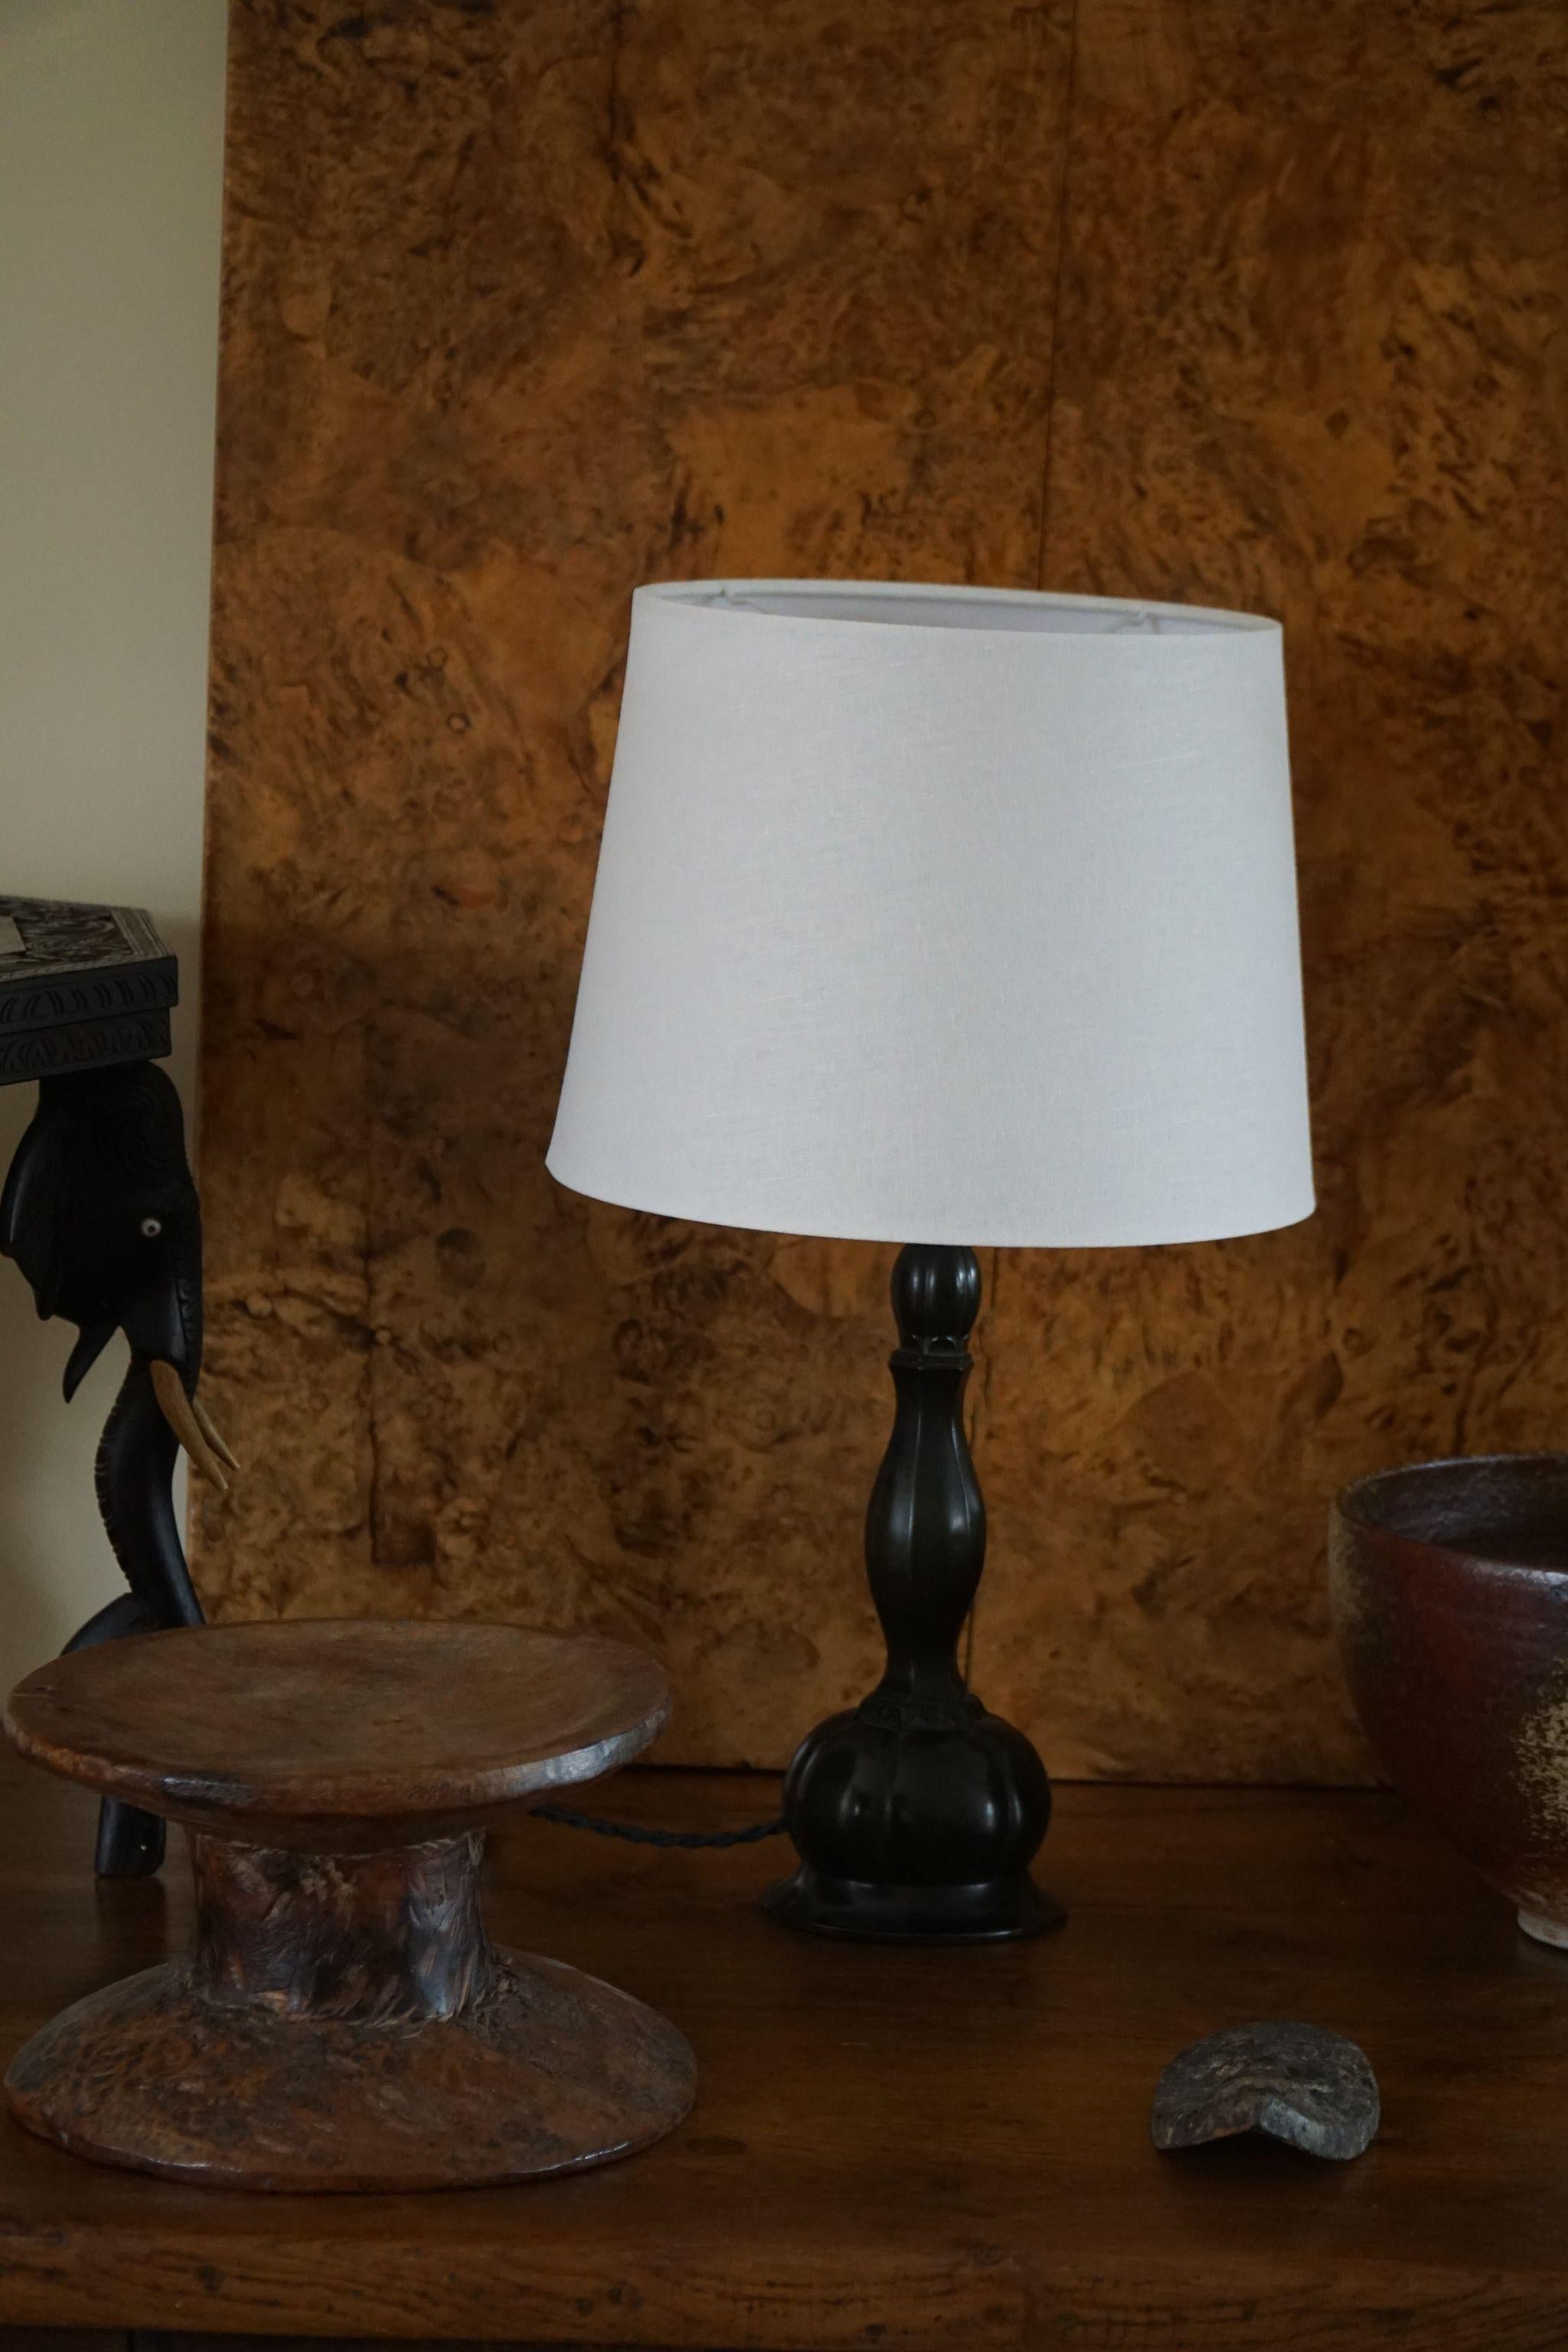 A classic table lamp in patinated disko metal. Made by Danish designer Just Andersen in the 1920s. Model D80, signed underneath.

This piece is in a good vintage condition.

Just Andersen (1884-1943) is a fine representative of modern Danish